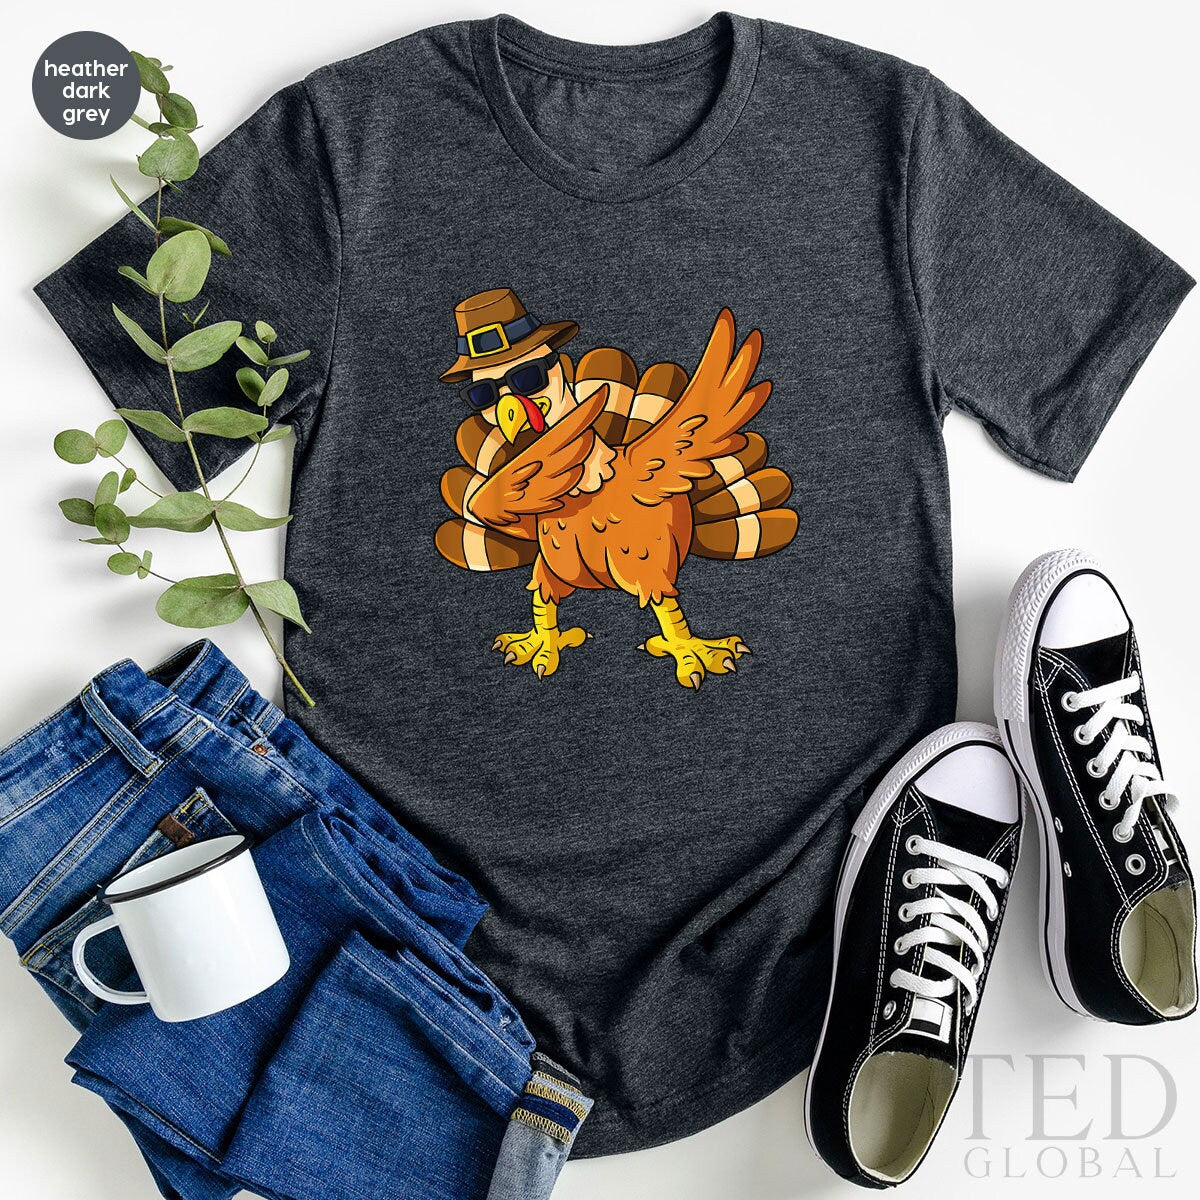 Family Thanksgiving Party T-Shirt, Coolest Turkey T Shirt,Fall Shirts, Wine Turkey Family Shirt, Funny Turkey TShirt, Gift For Thanksgiving - Fastdeliverytees.com